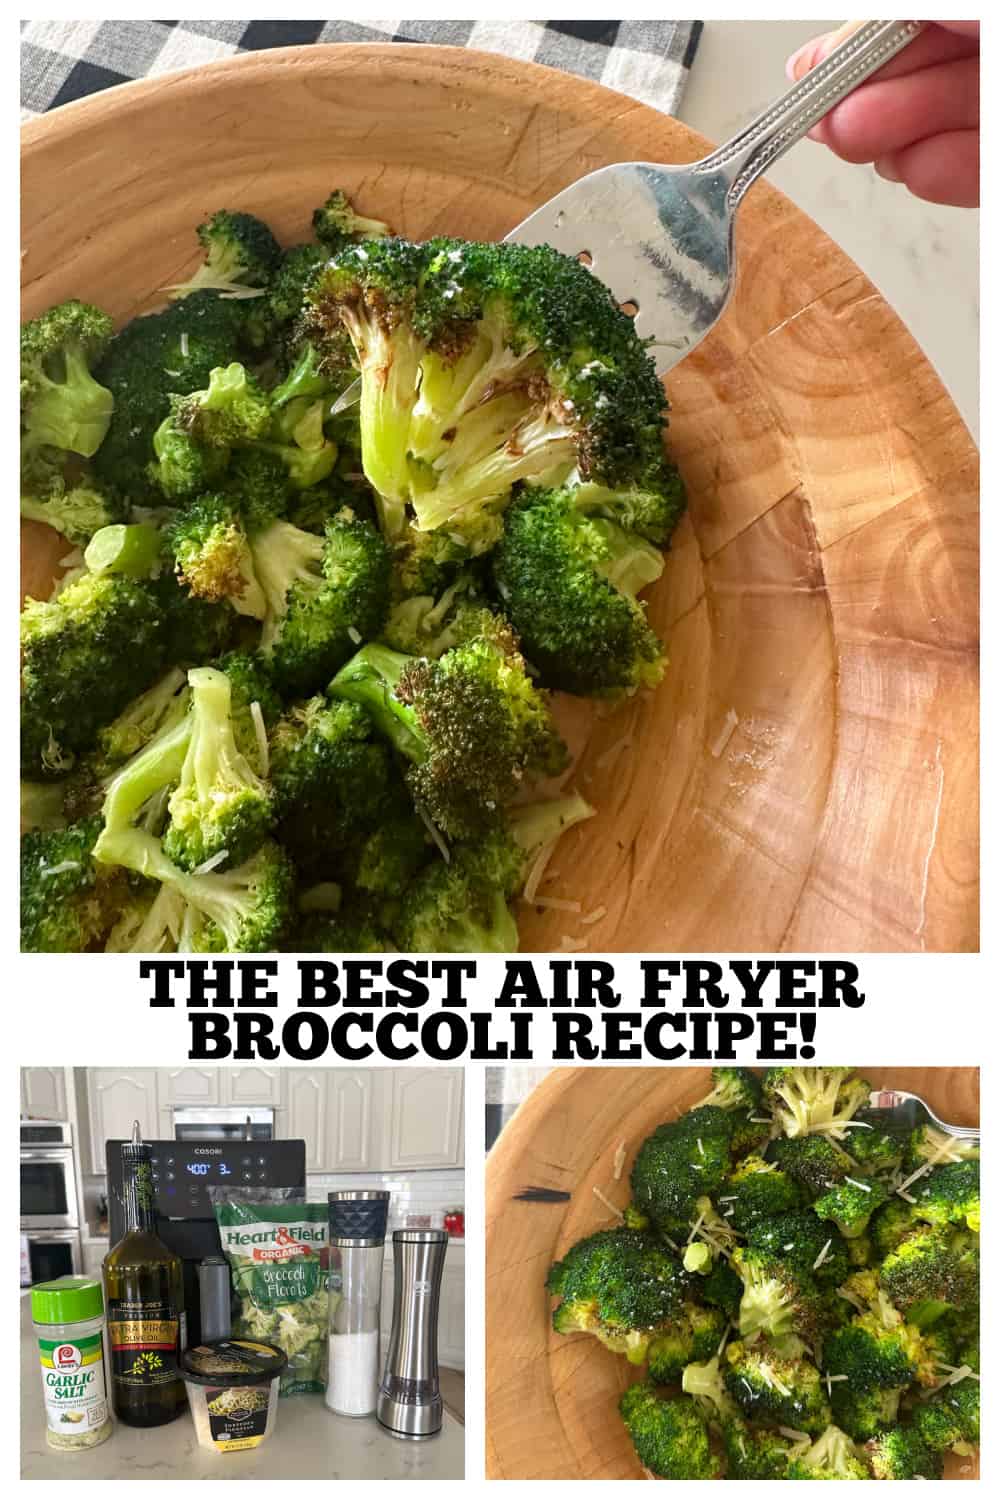 photo collage of air fryer broccoli recipe